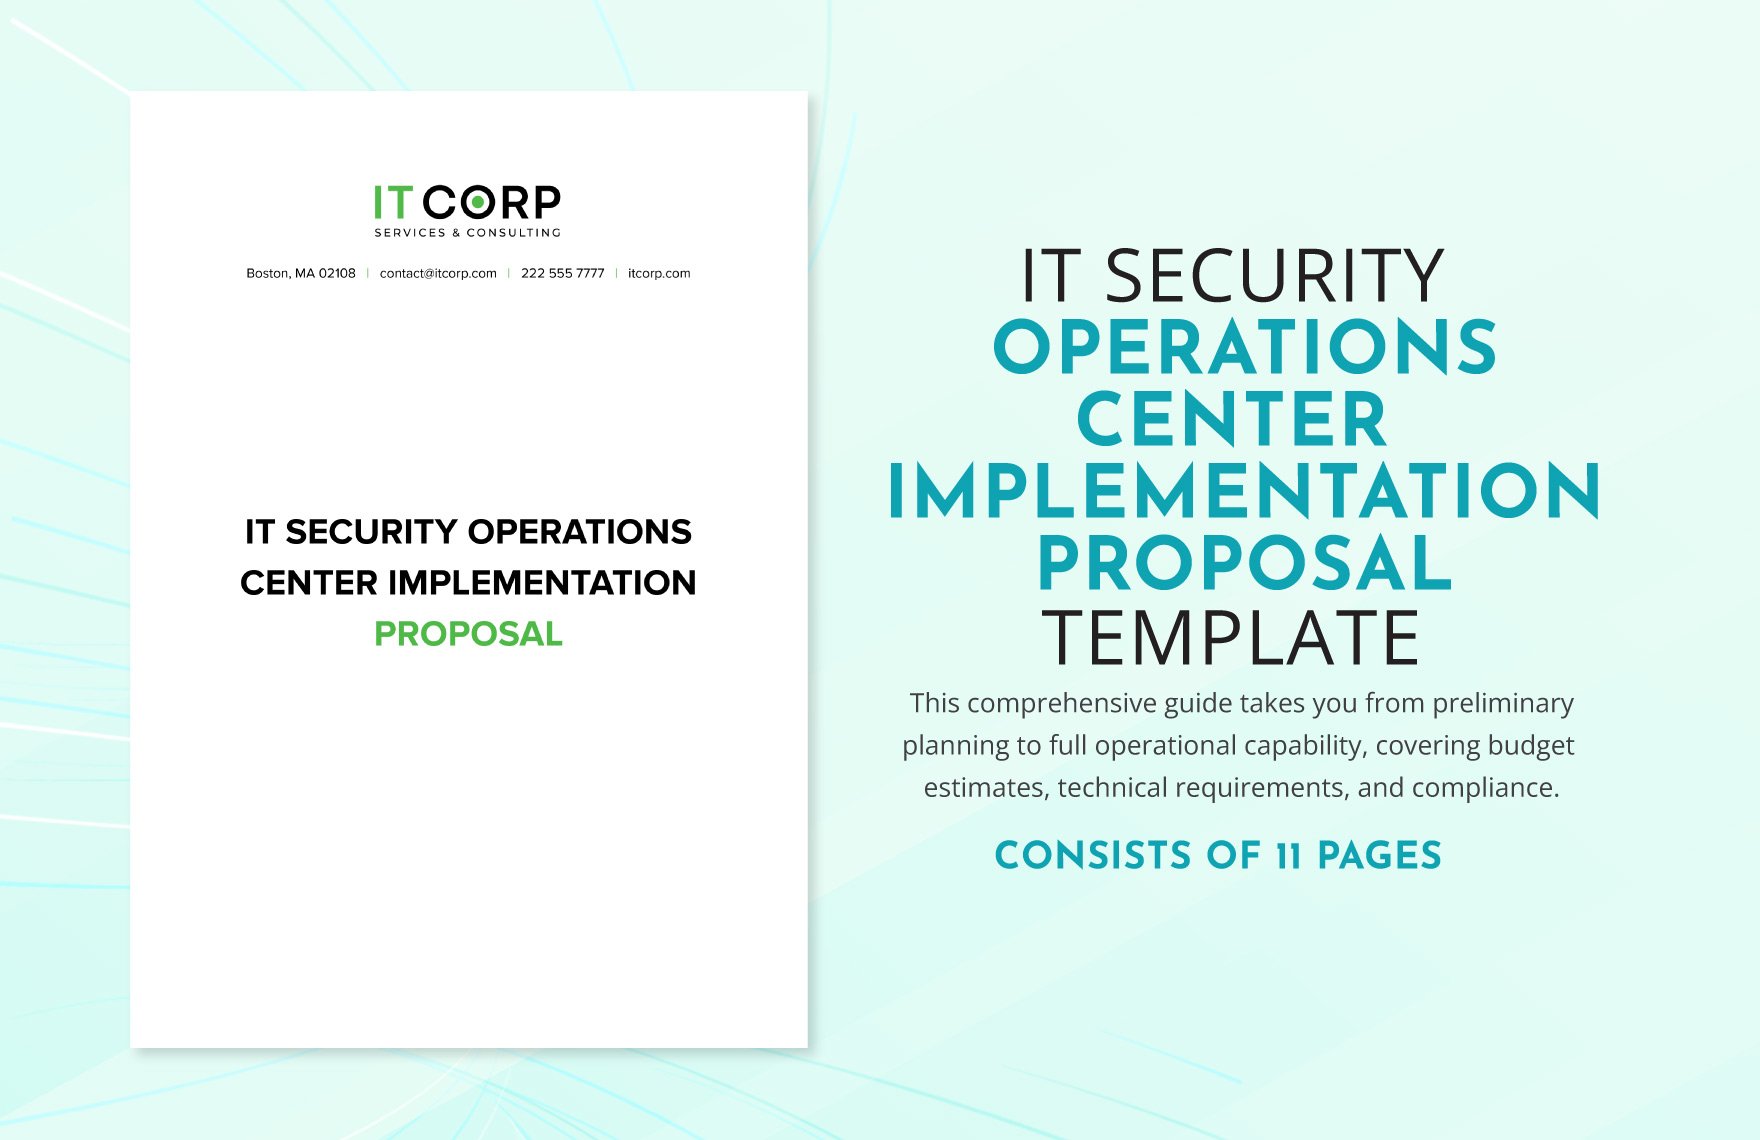 IT Security Operations Center Implementation Proposal Template